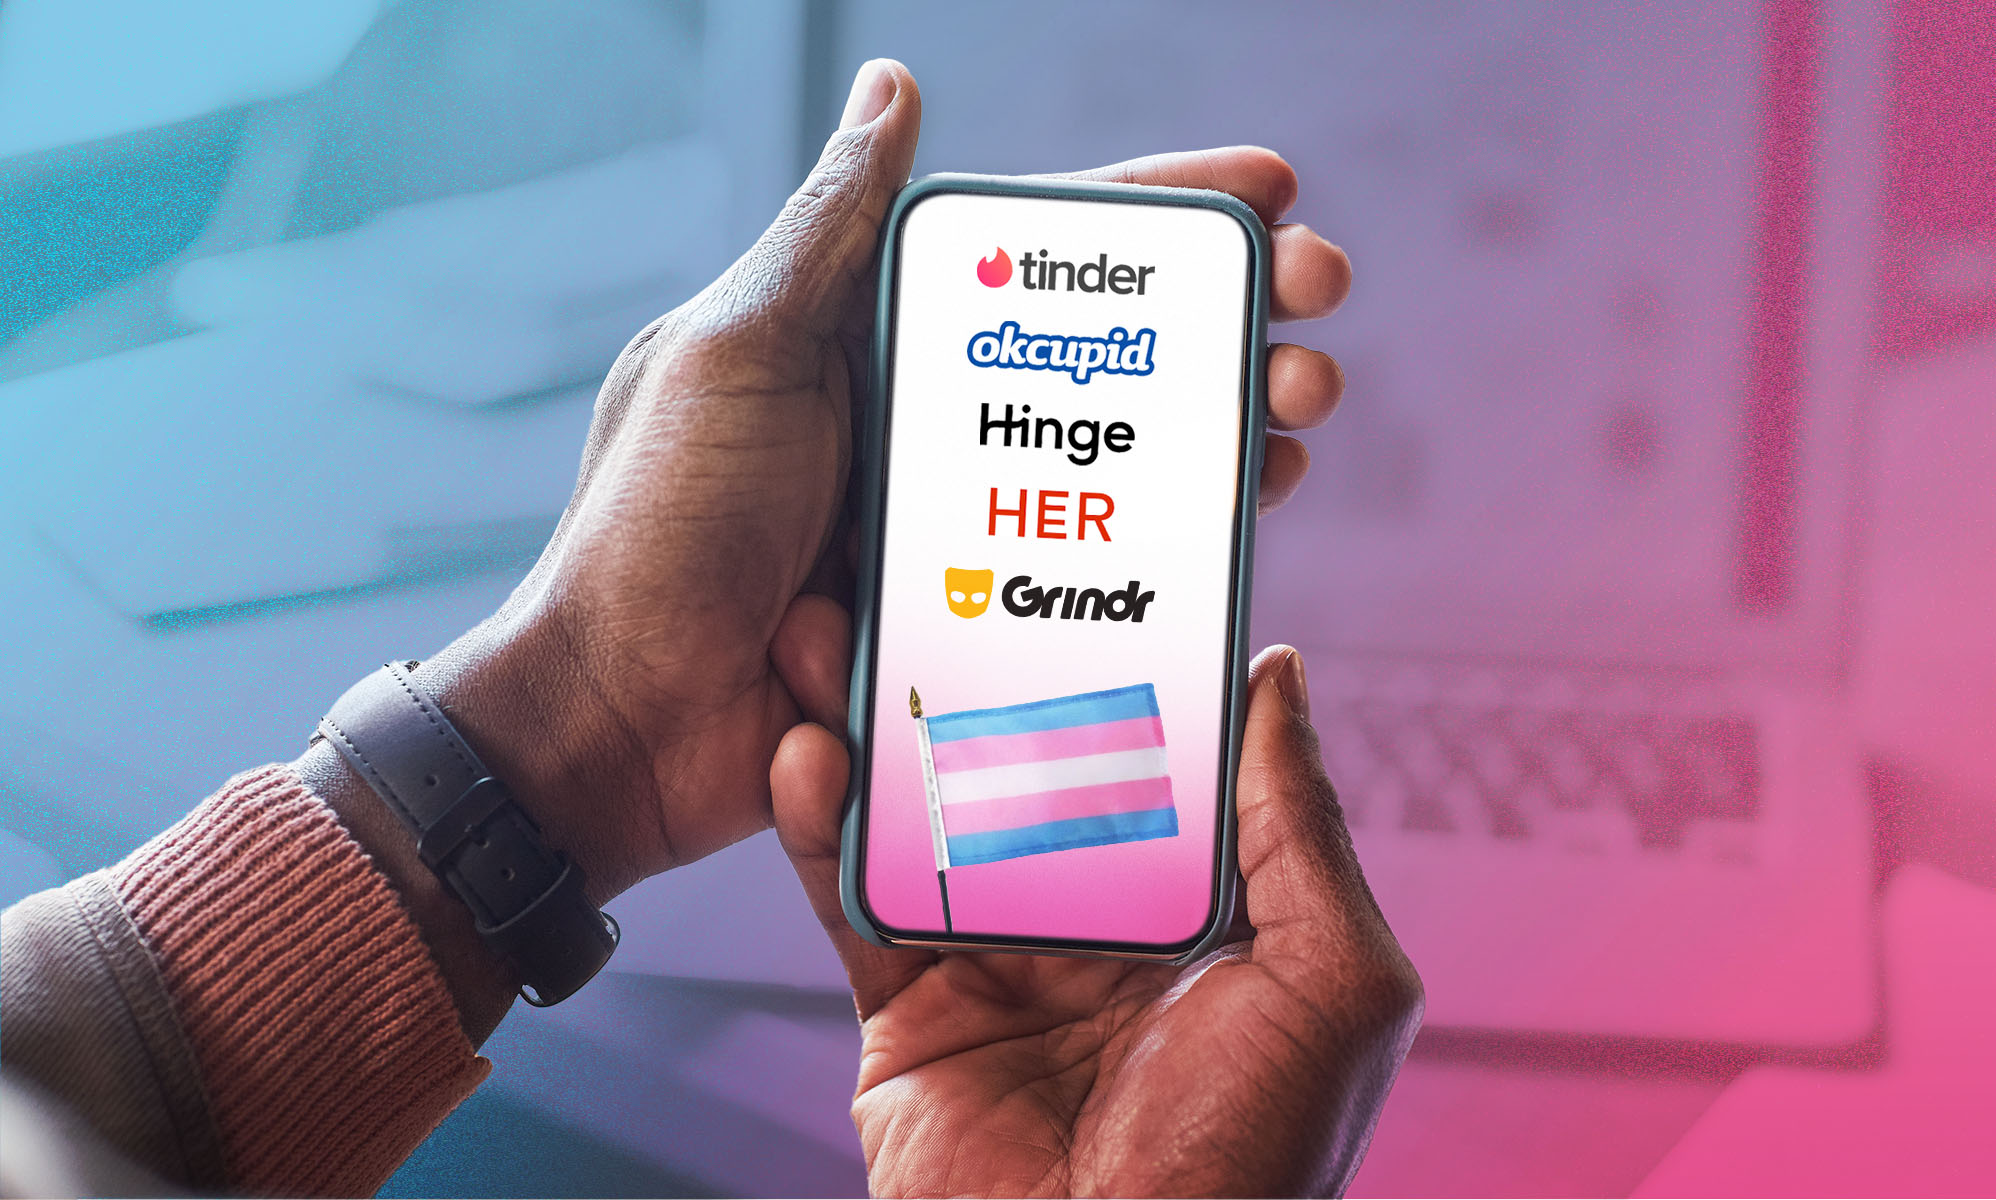 Dating apps that welcome trans people Tinder, Grindr and more